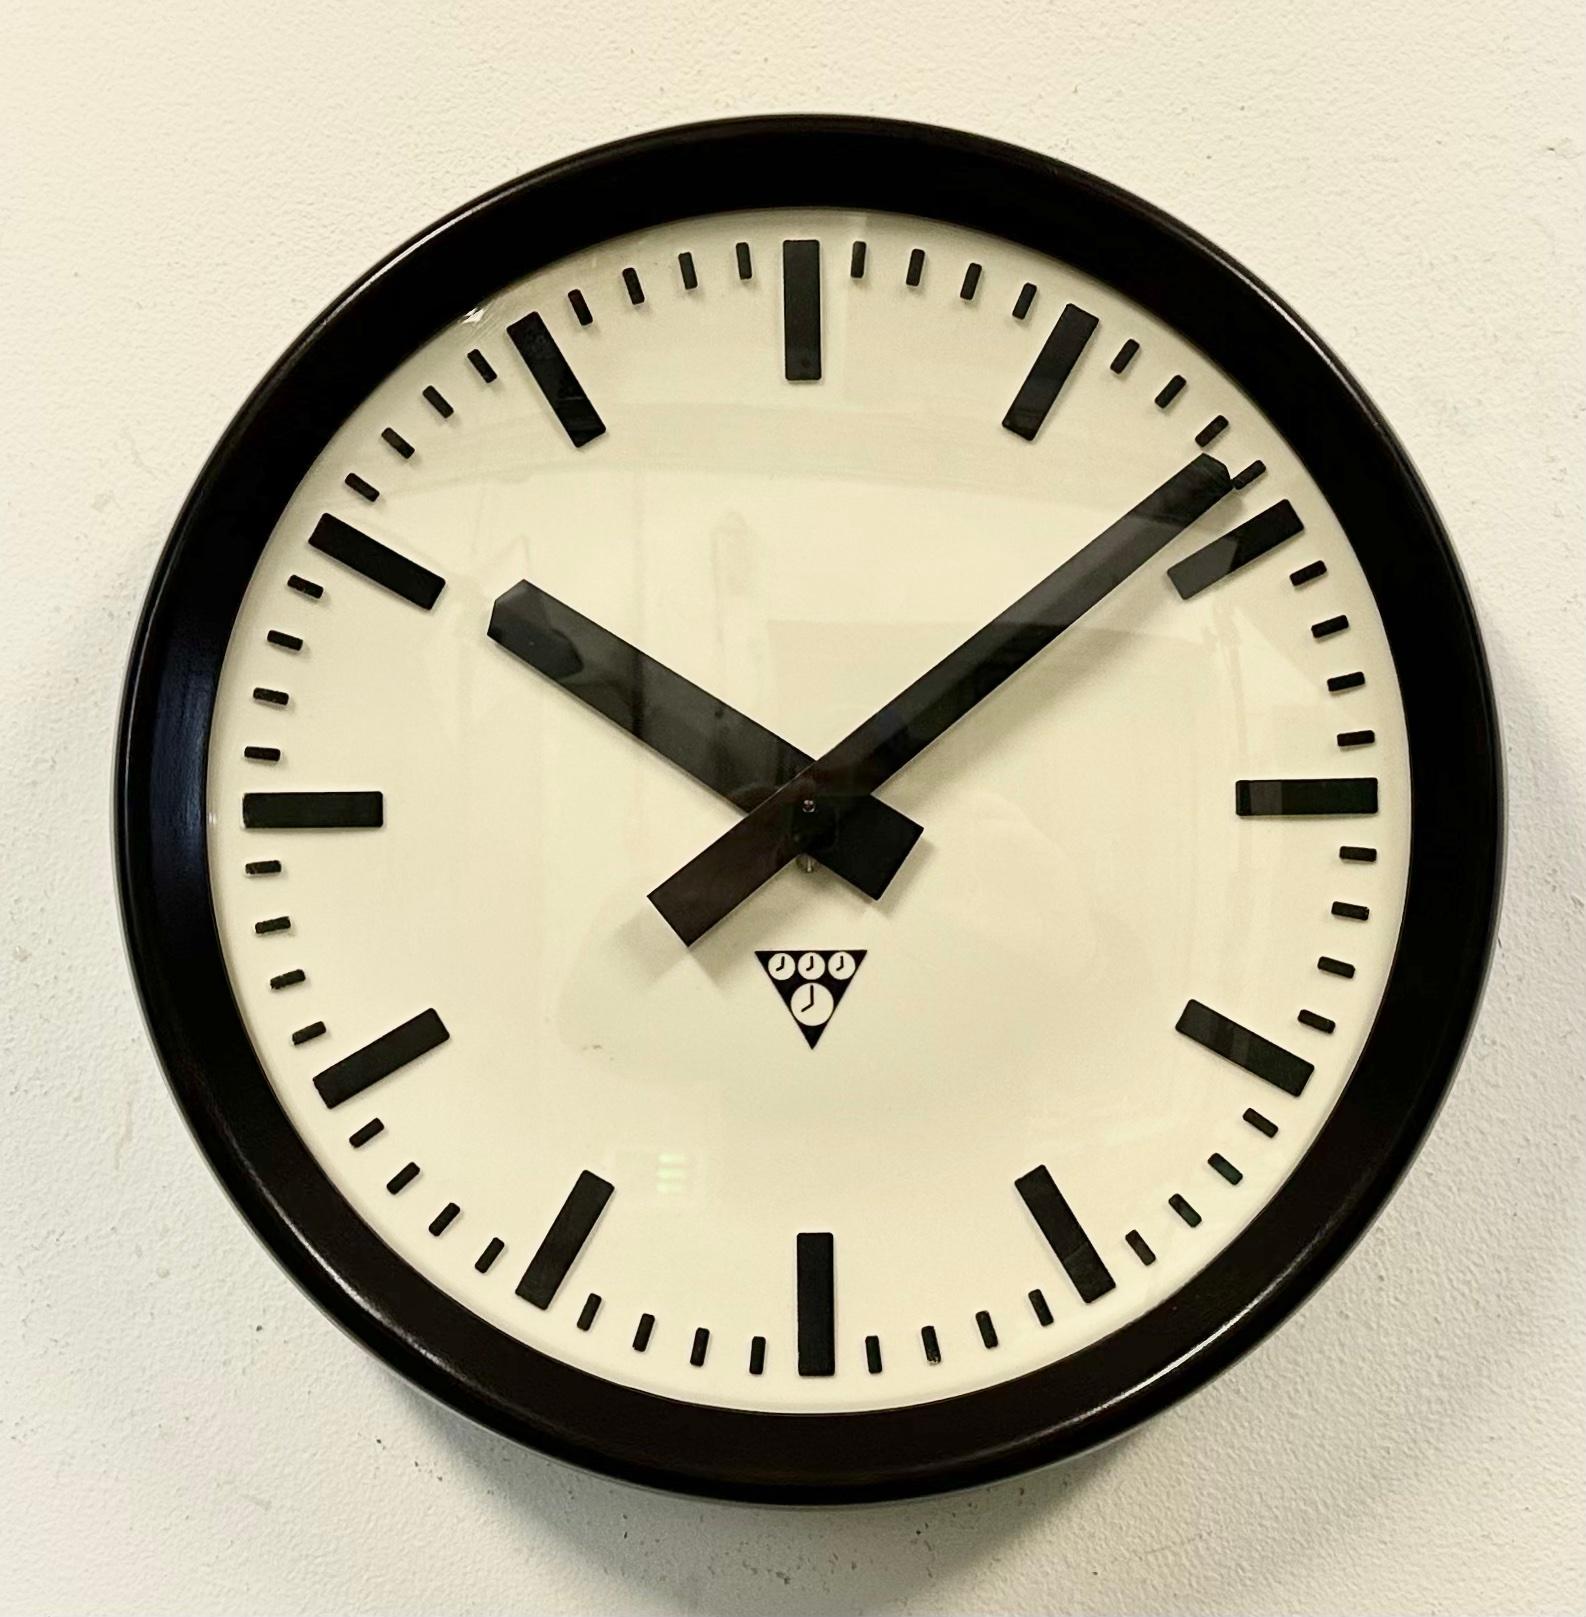 Wall clock produced by Pragotron in former Czechoslovakia during the 1960s. It features a brown bakelite frame, a plastic dial, an aluminium hands and a convex clear glass cover. The piece has been converted into a battery-powered clockwork and